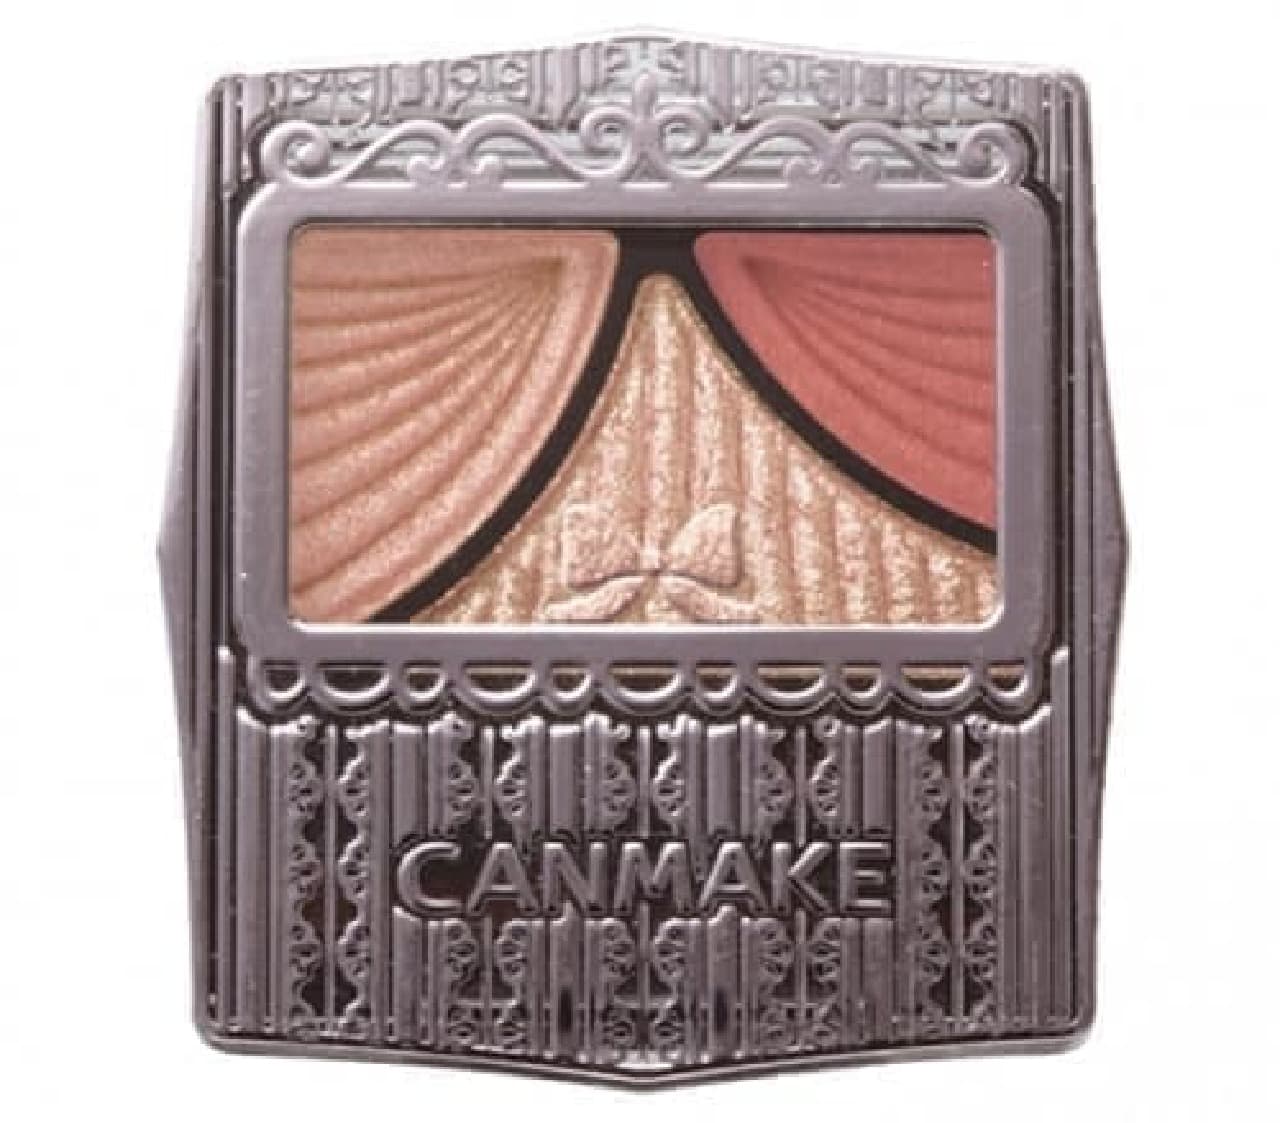 New color "No.12 Chai Tea Rose" from Canmake "Juicy Pure Eyes"